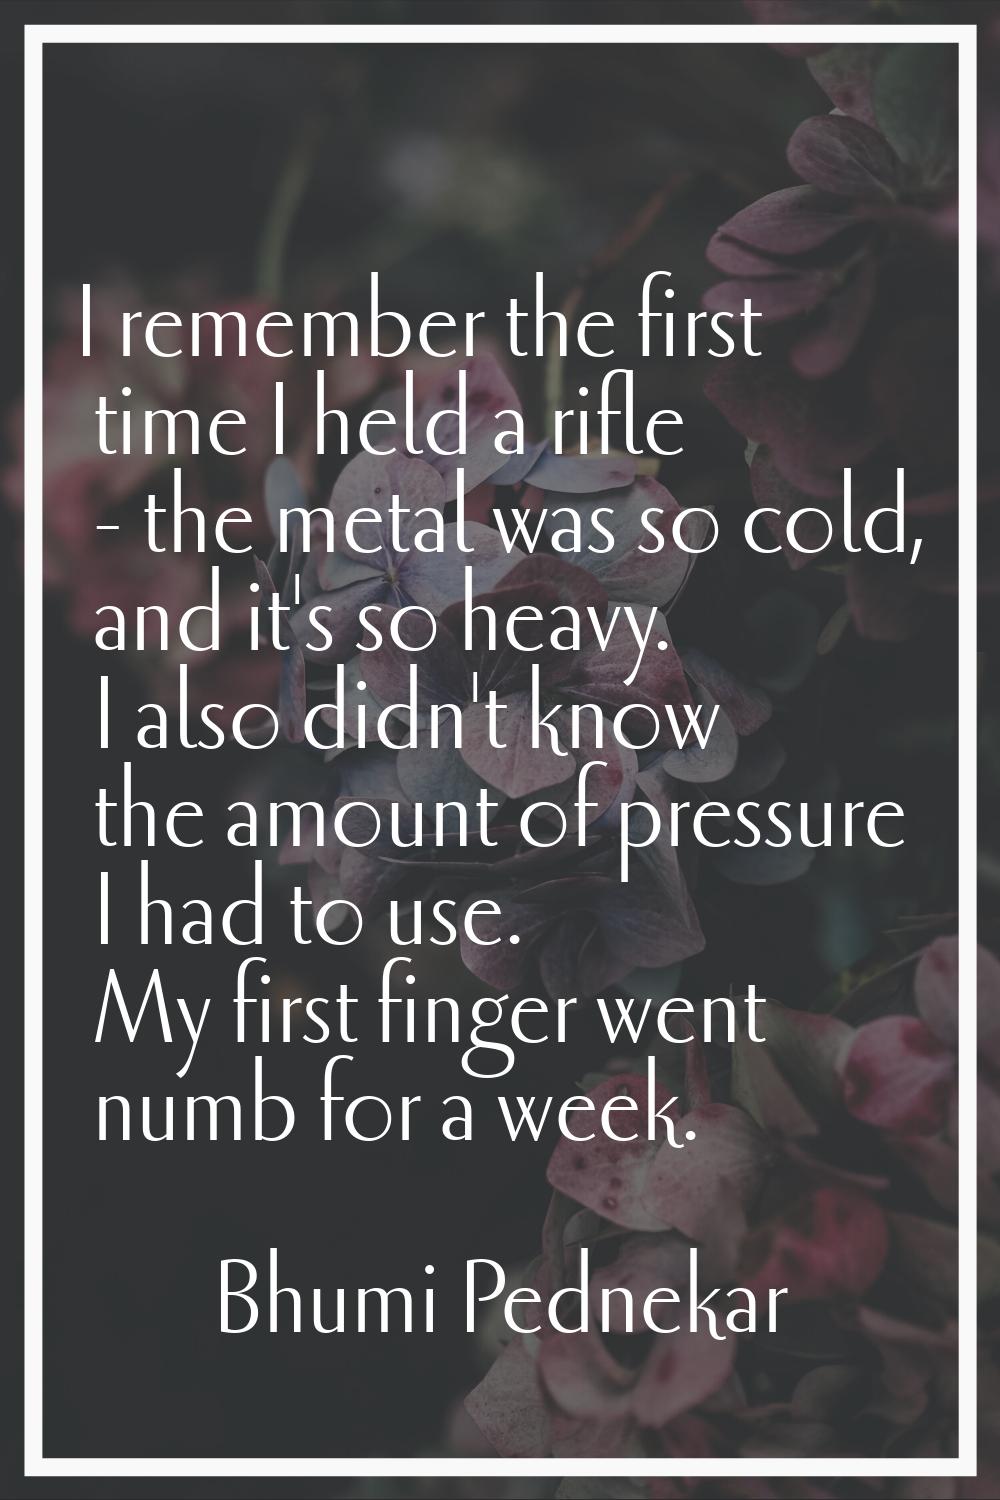 I remember the first time I held a rifle - the metal was so cold, and it's so heavy. I also didn't 